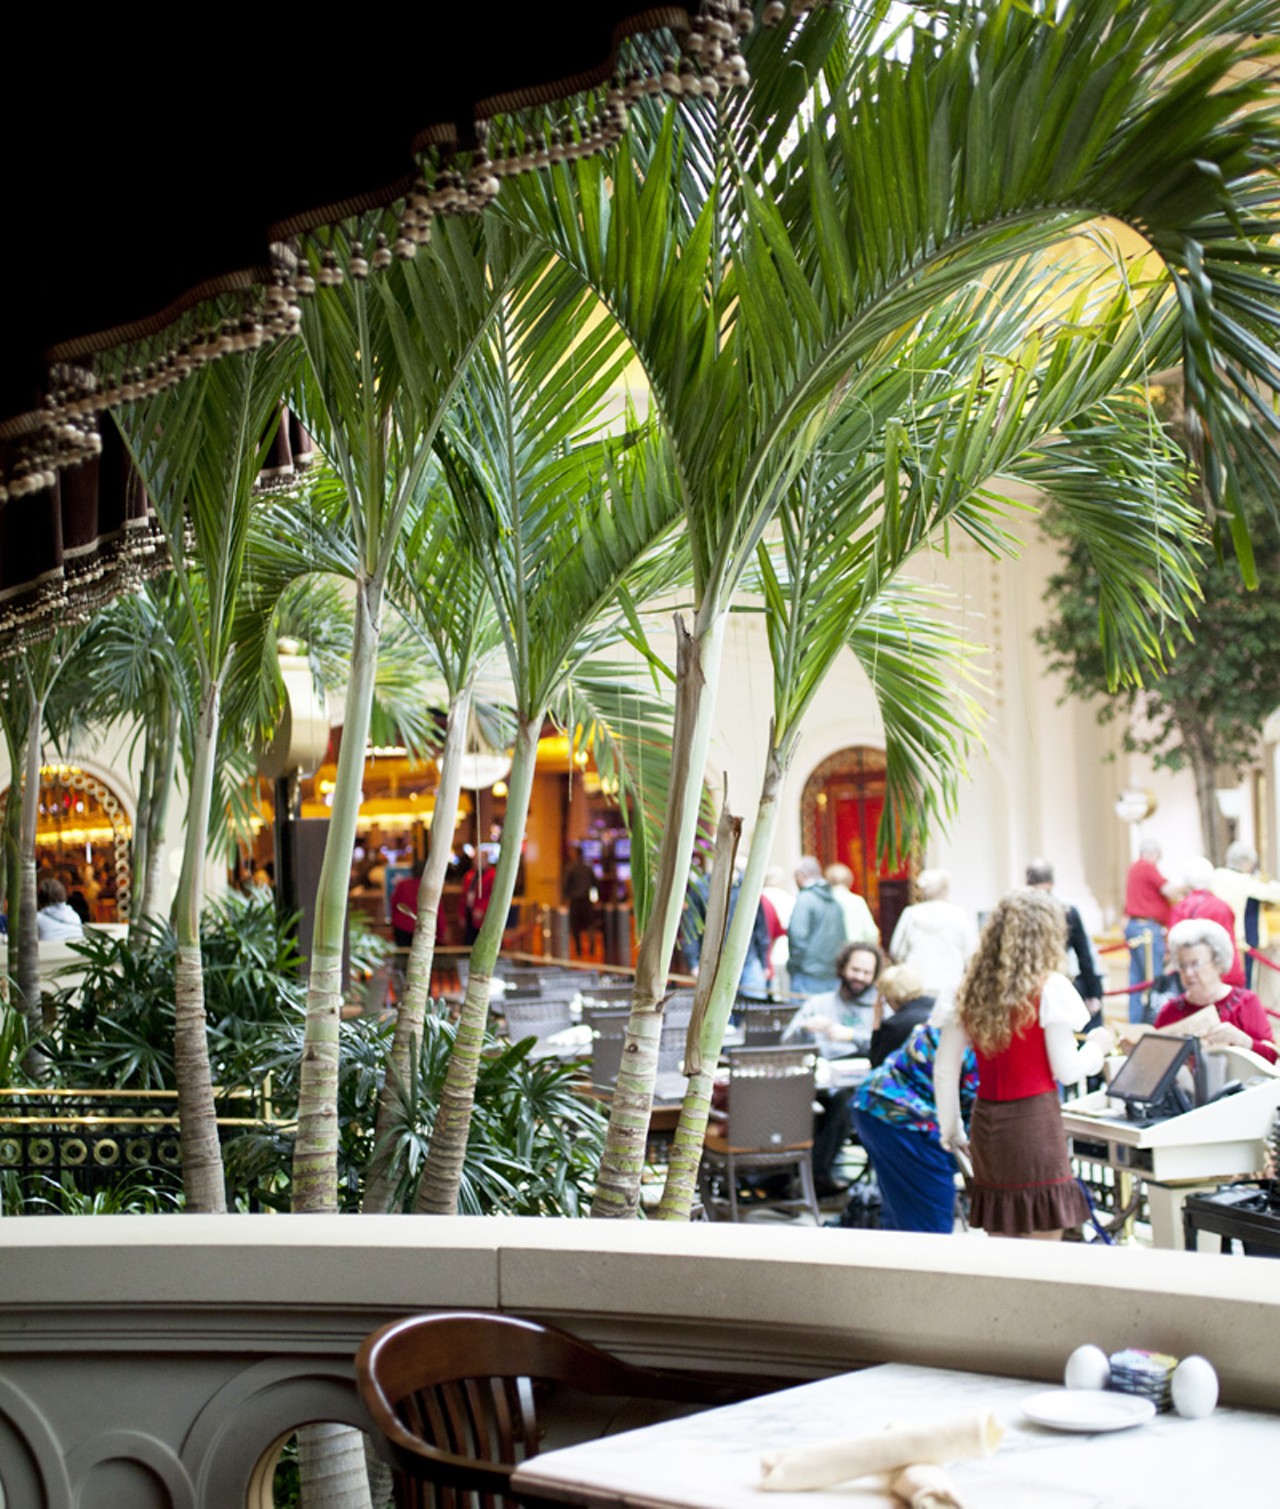 The indoor "patio" at 1904 Beerhouse is lined with palm trees.